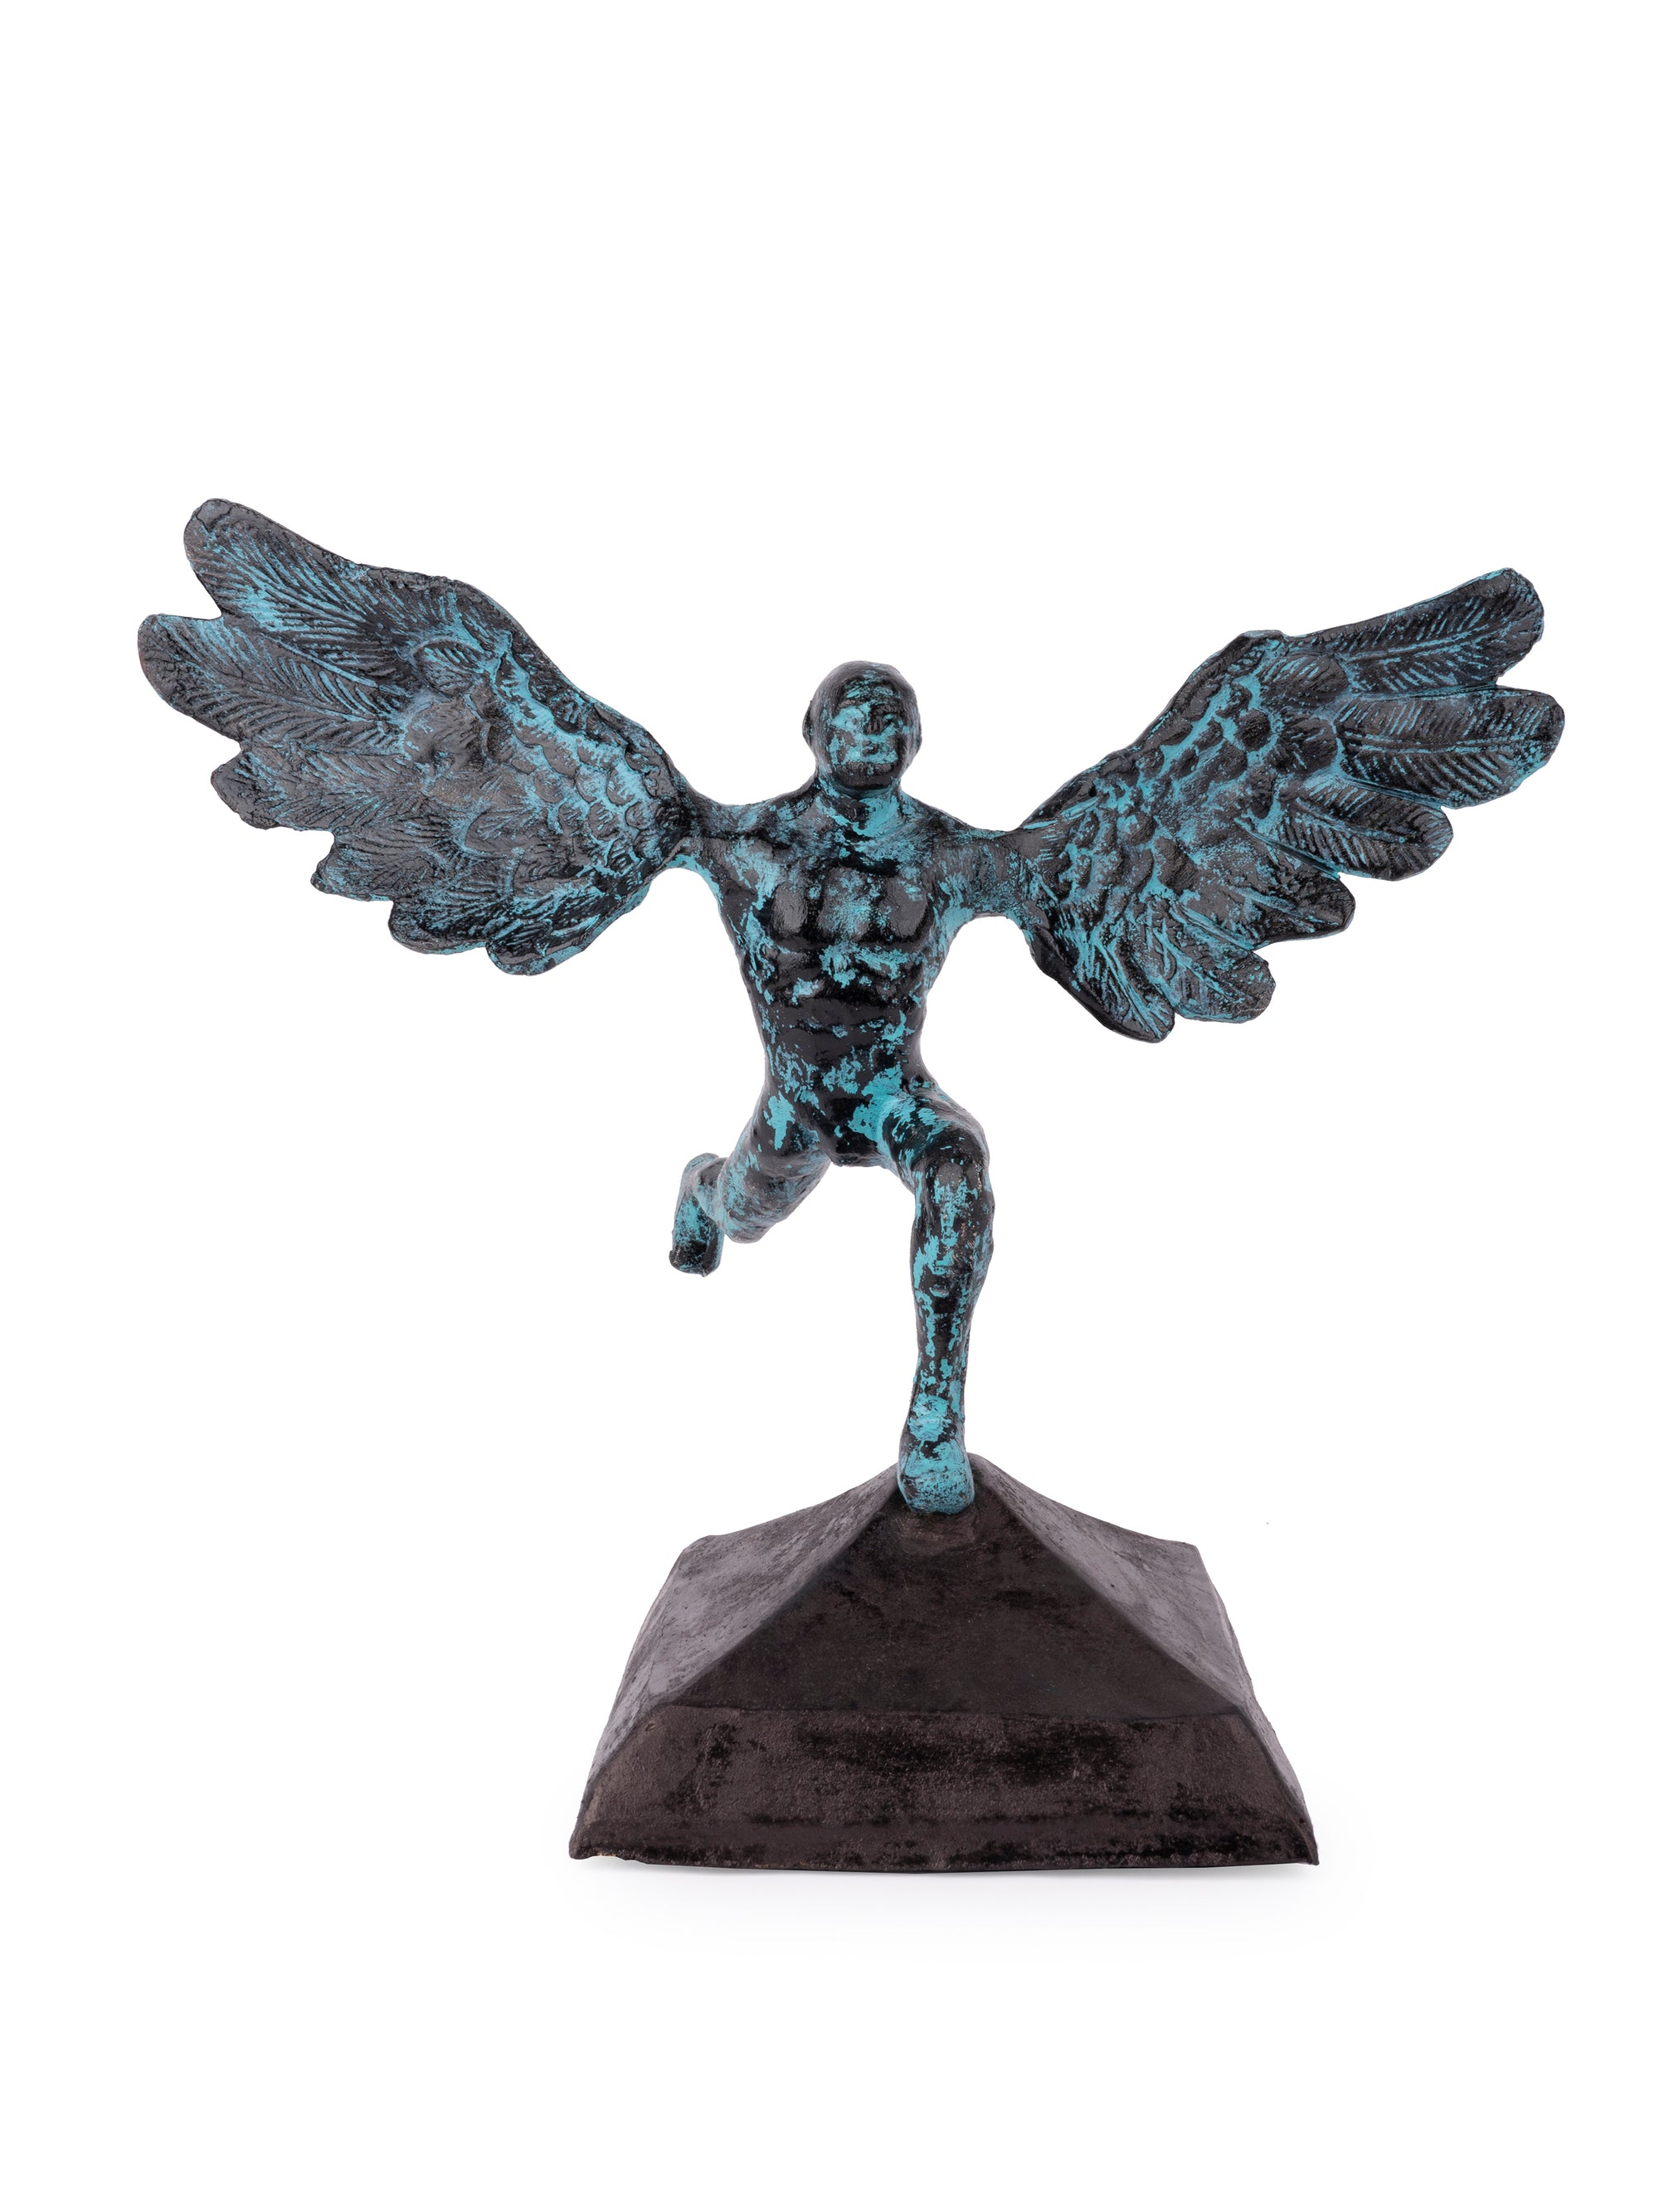 Sculpture name - FLYING ANGEL - The Heritage Artifacts